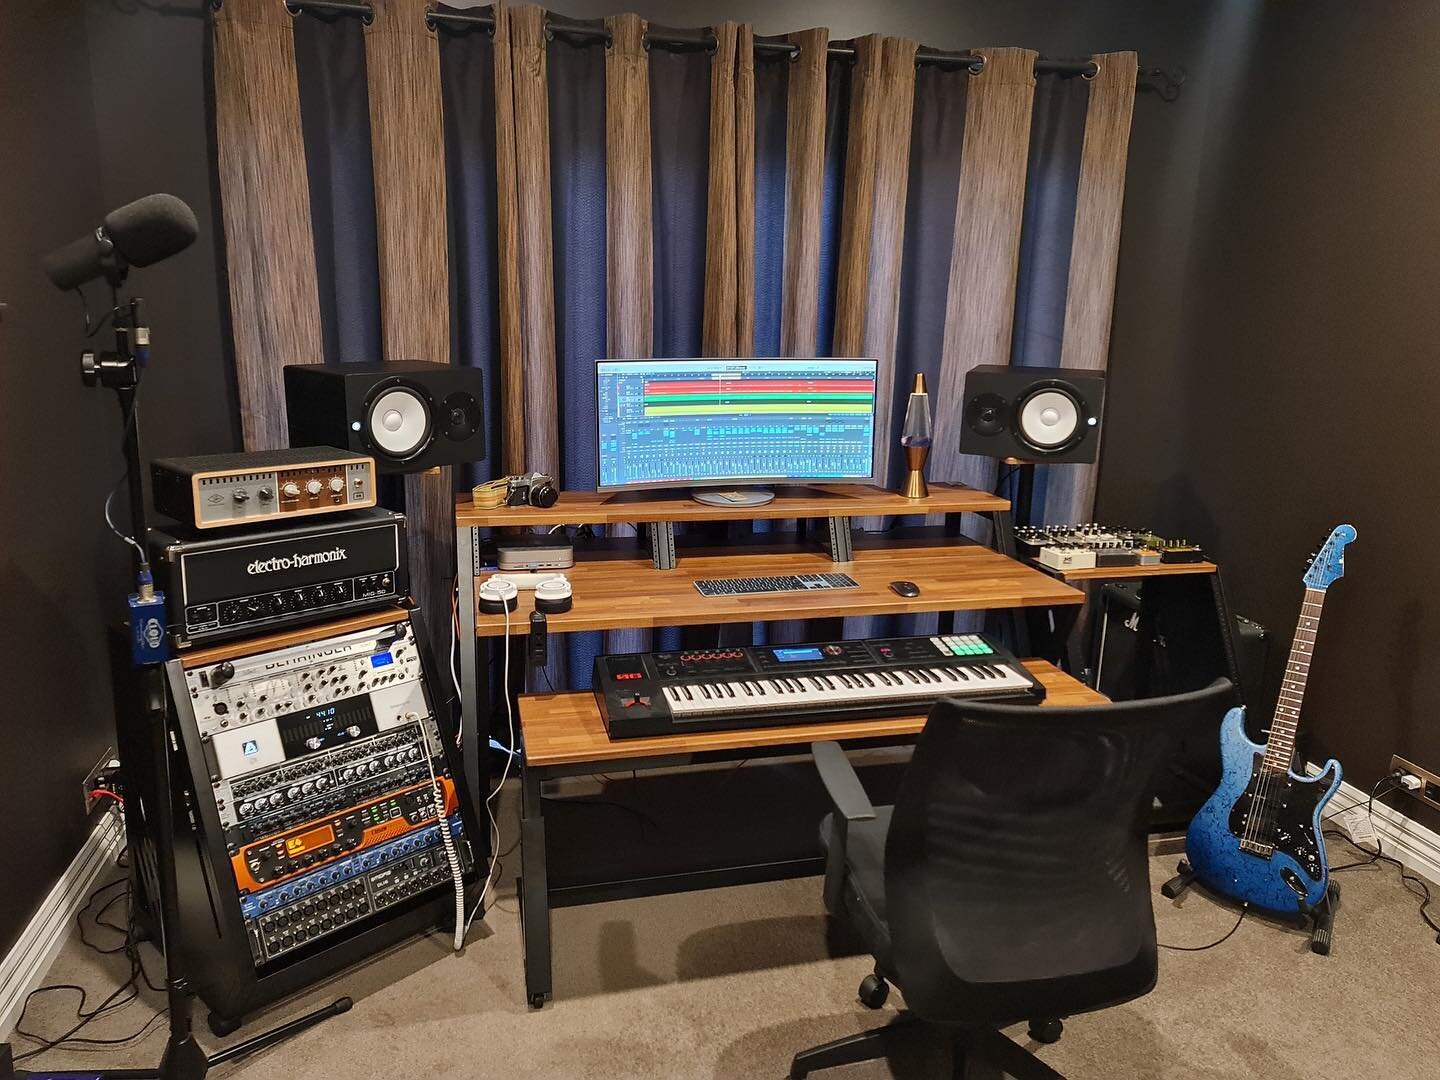 Another happy @waveboneofficial customer with his Headquarter workstation, Fin rack cases and Grand Gemini speaker stands. Nice set up and congratulations! Upgrade your studio today. PM us for inquiries.